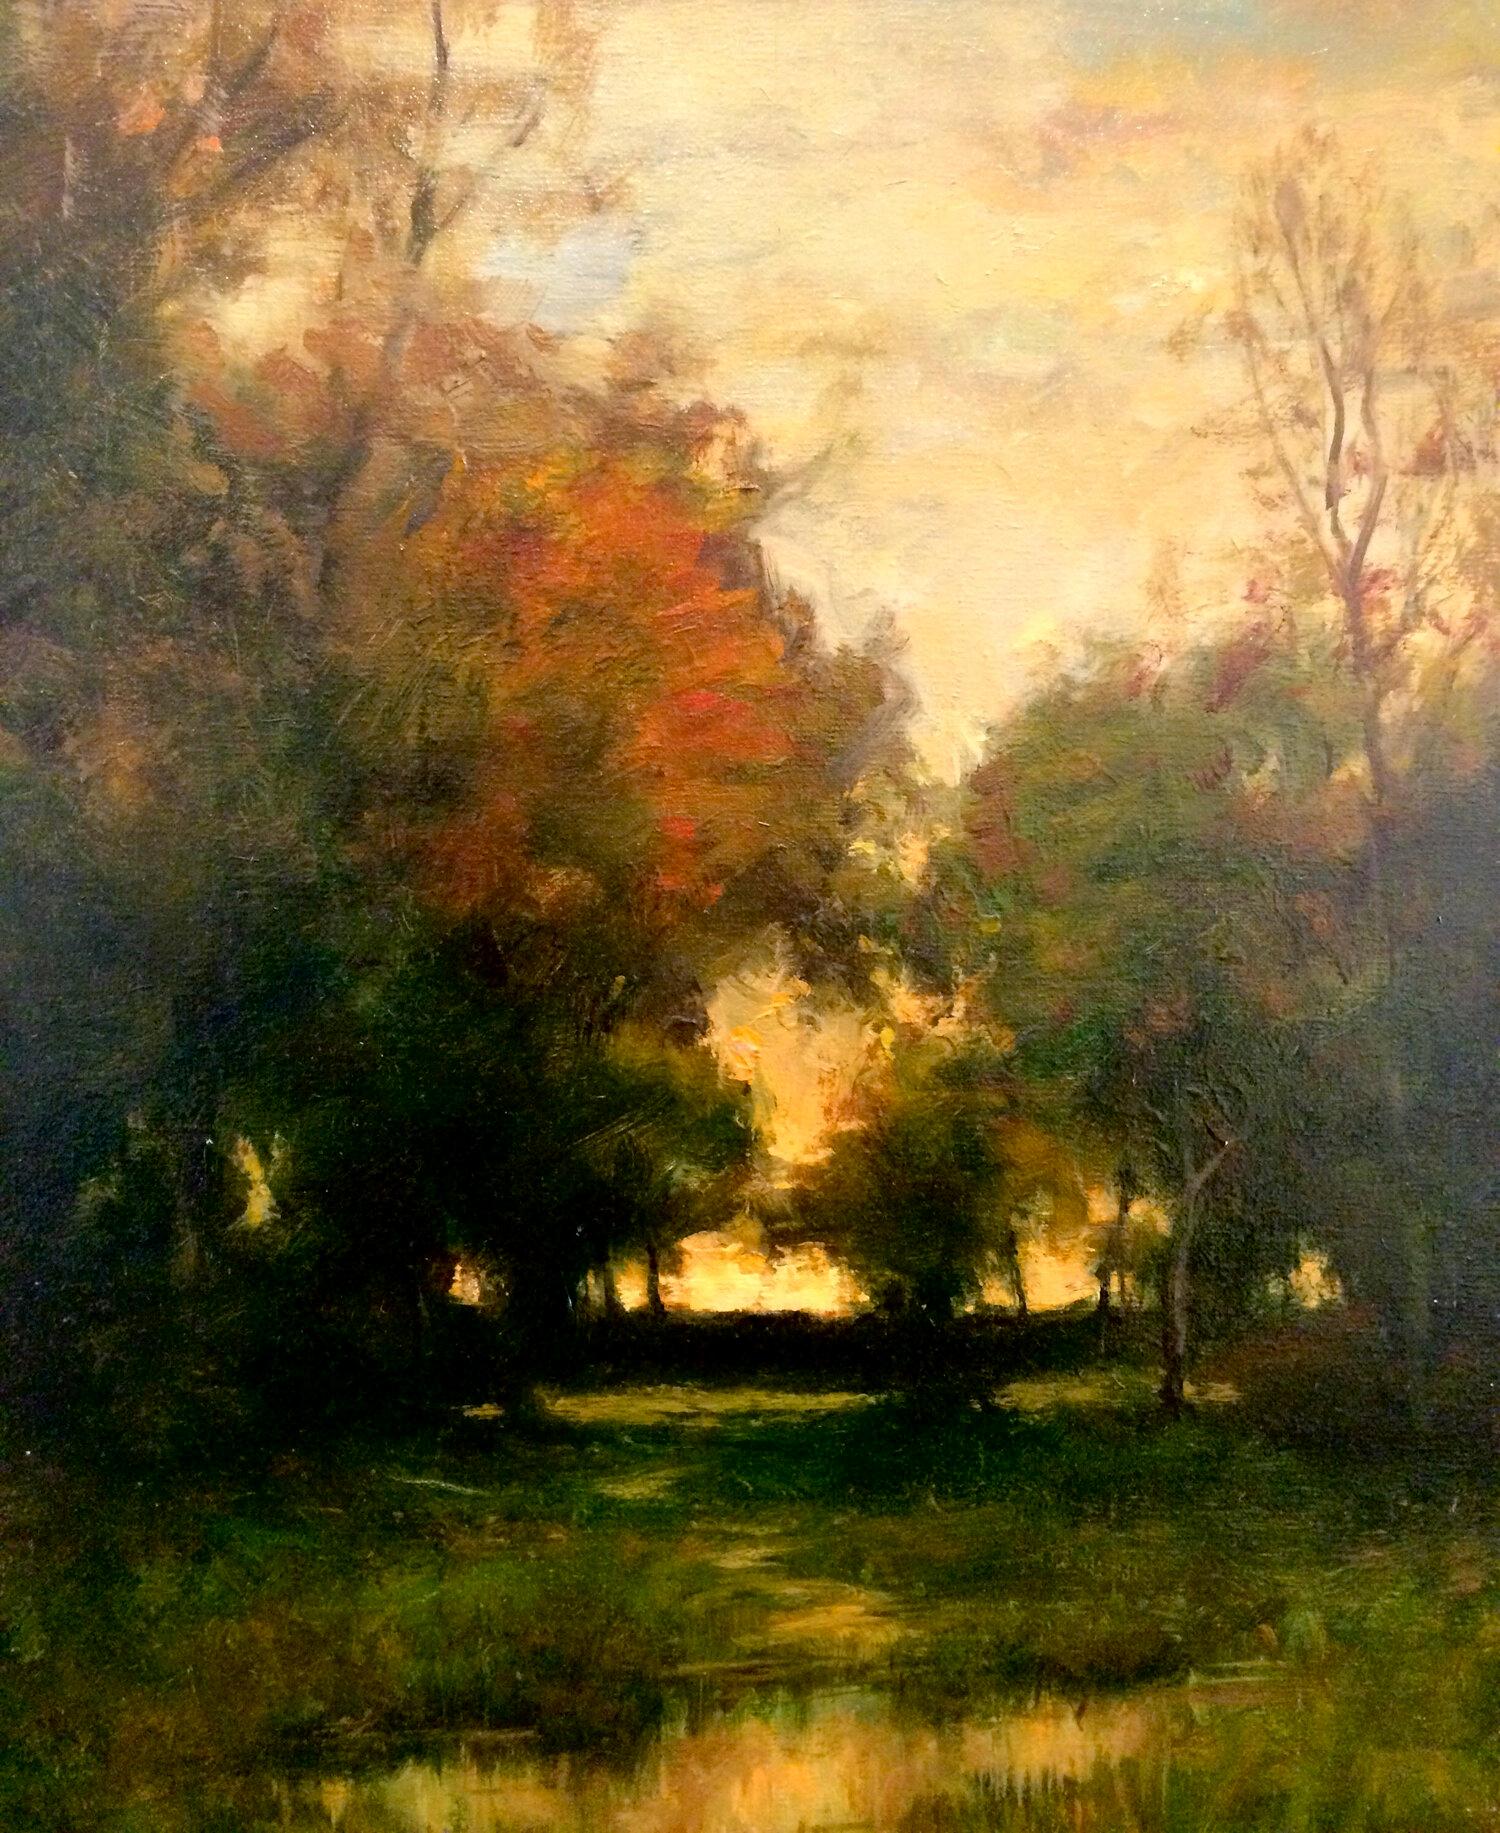 Dennis Sheehan, "Fall Hues", Moody Tonalist Landscape Oil Painting on Canvas